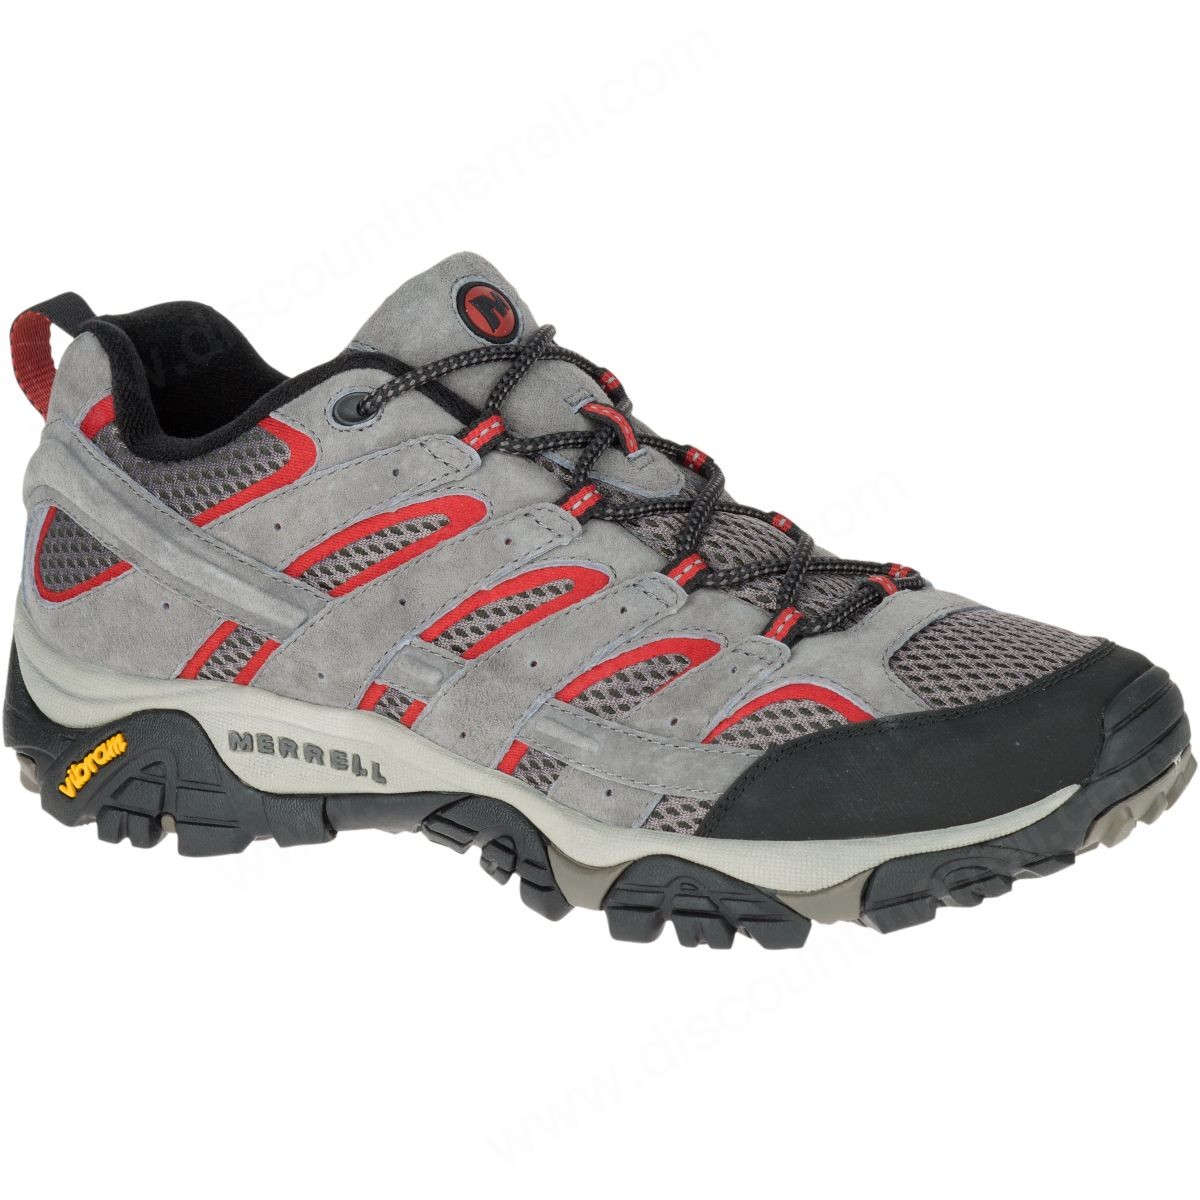 Merrell Mens's Moab Mother Of All Boots™ Ventilator Charcoal Grey - Merrell Mens's Moab Mother Of All Boots™ Ventilator Charcoal Grey